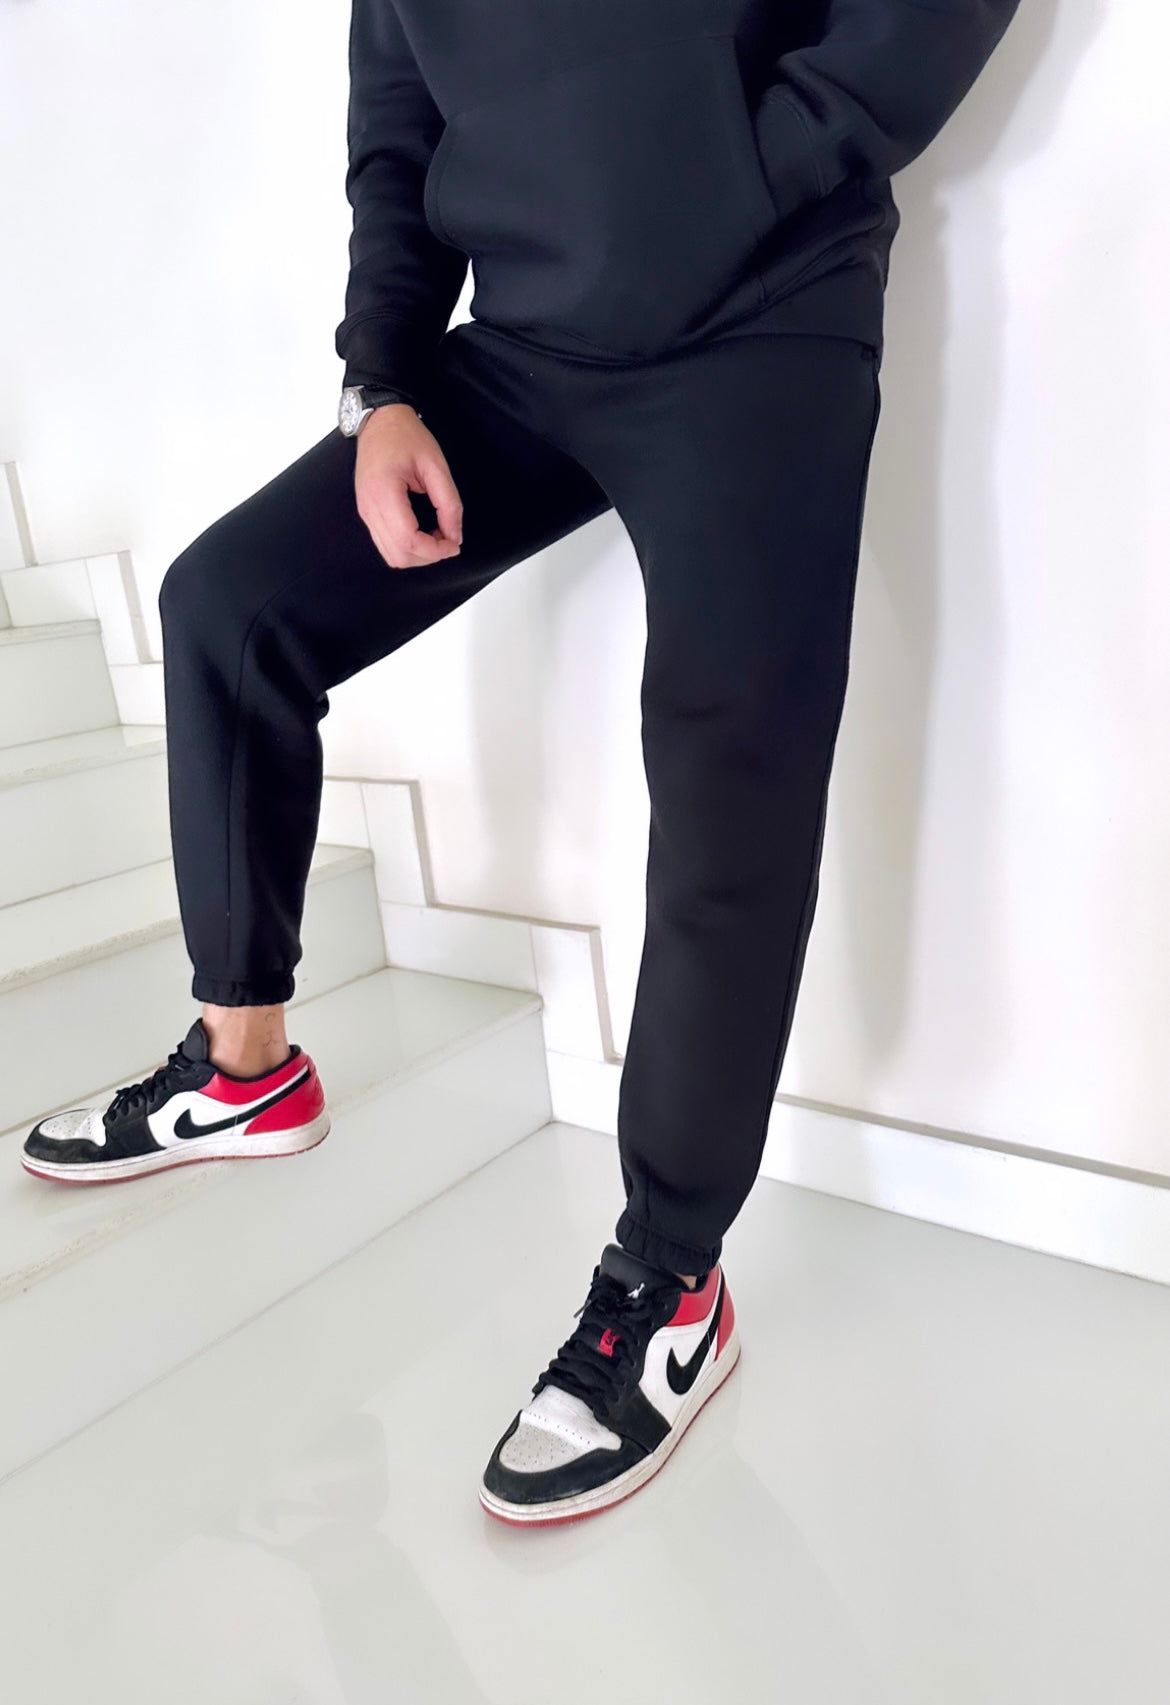 The Relaxed Sweatpants in Black